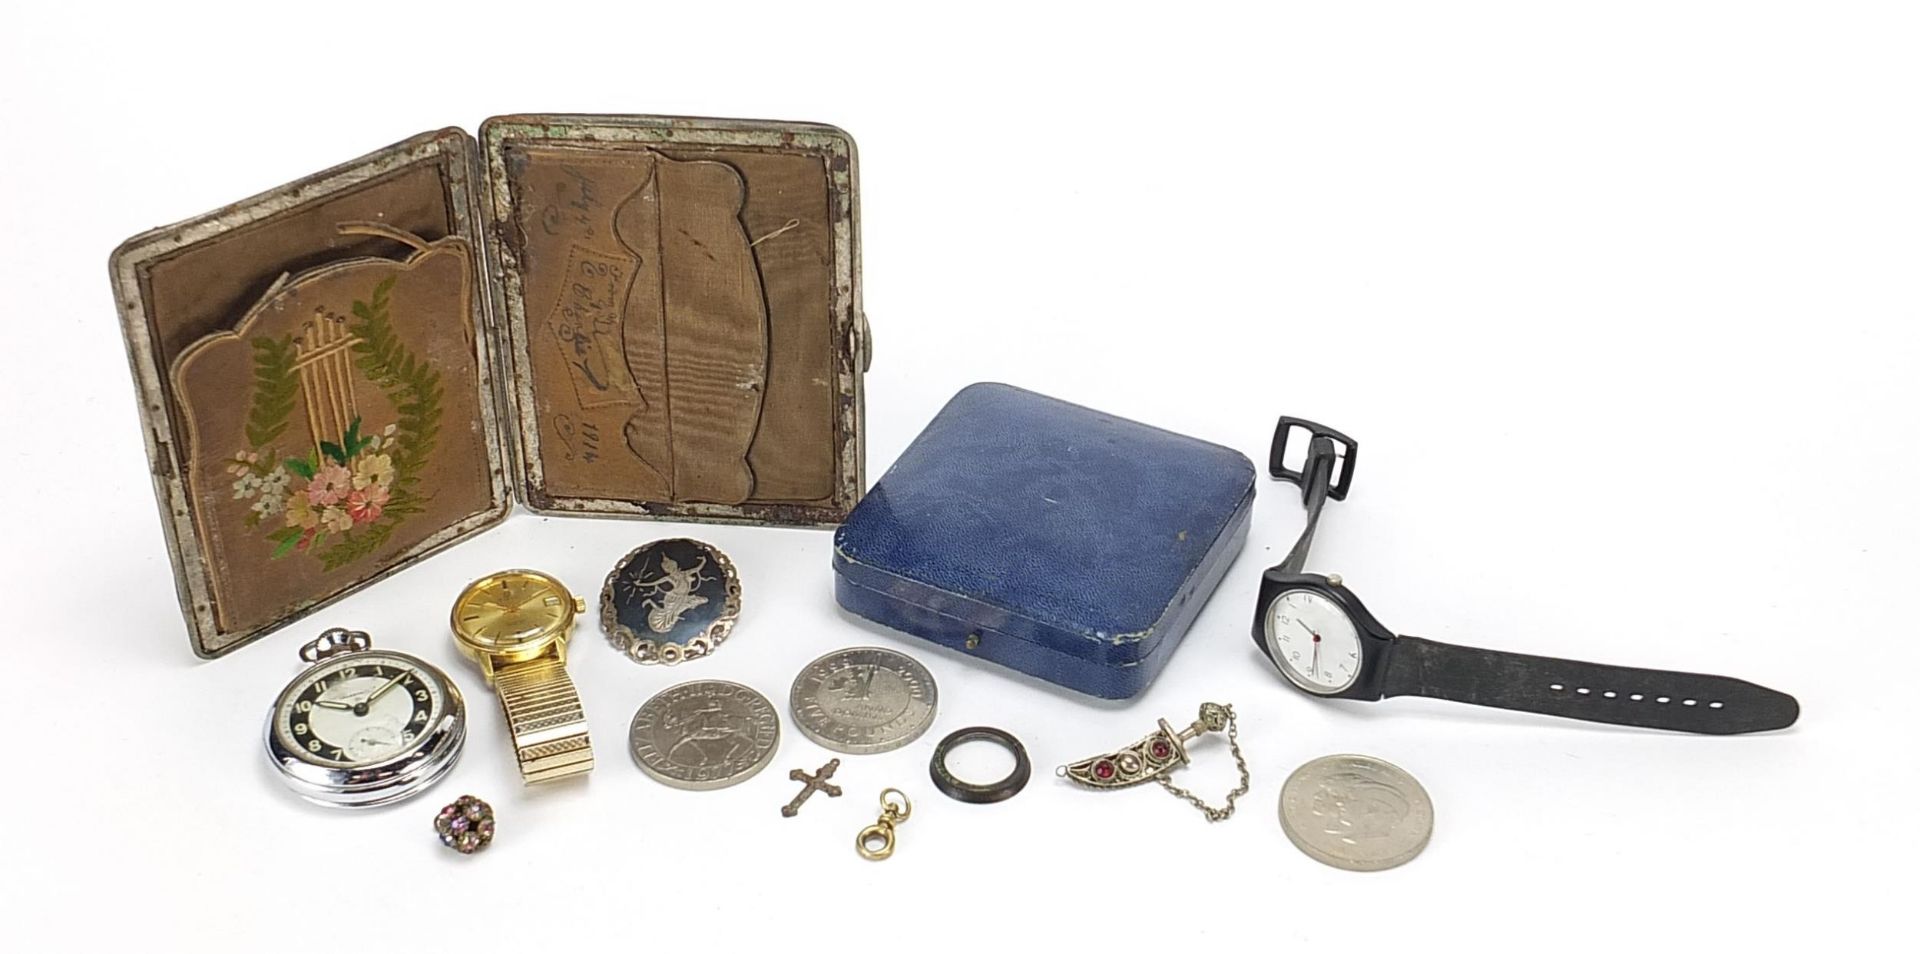 Antique and later jewellery and objects including Siam silver niello work brooch, Ingersoll pocket